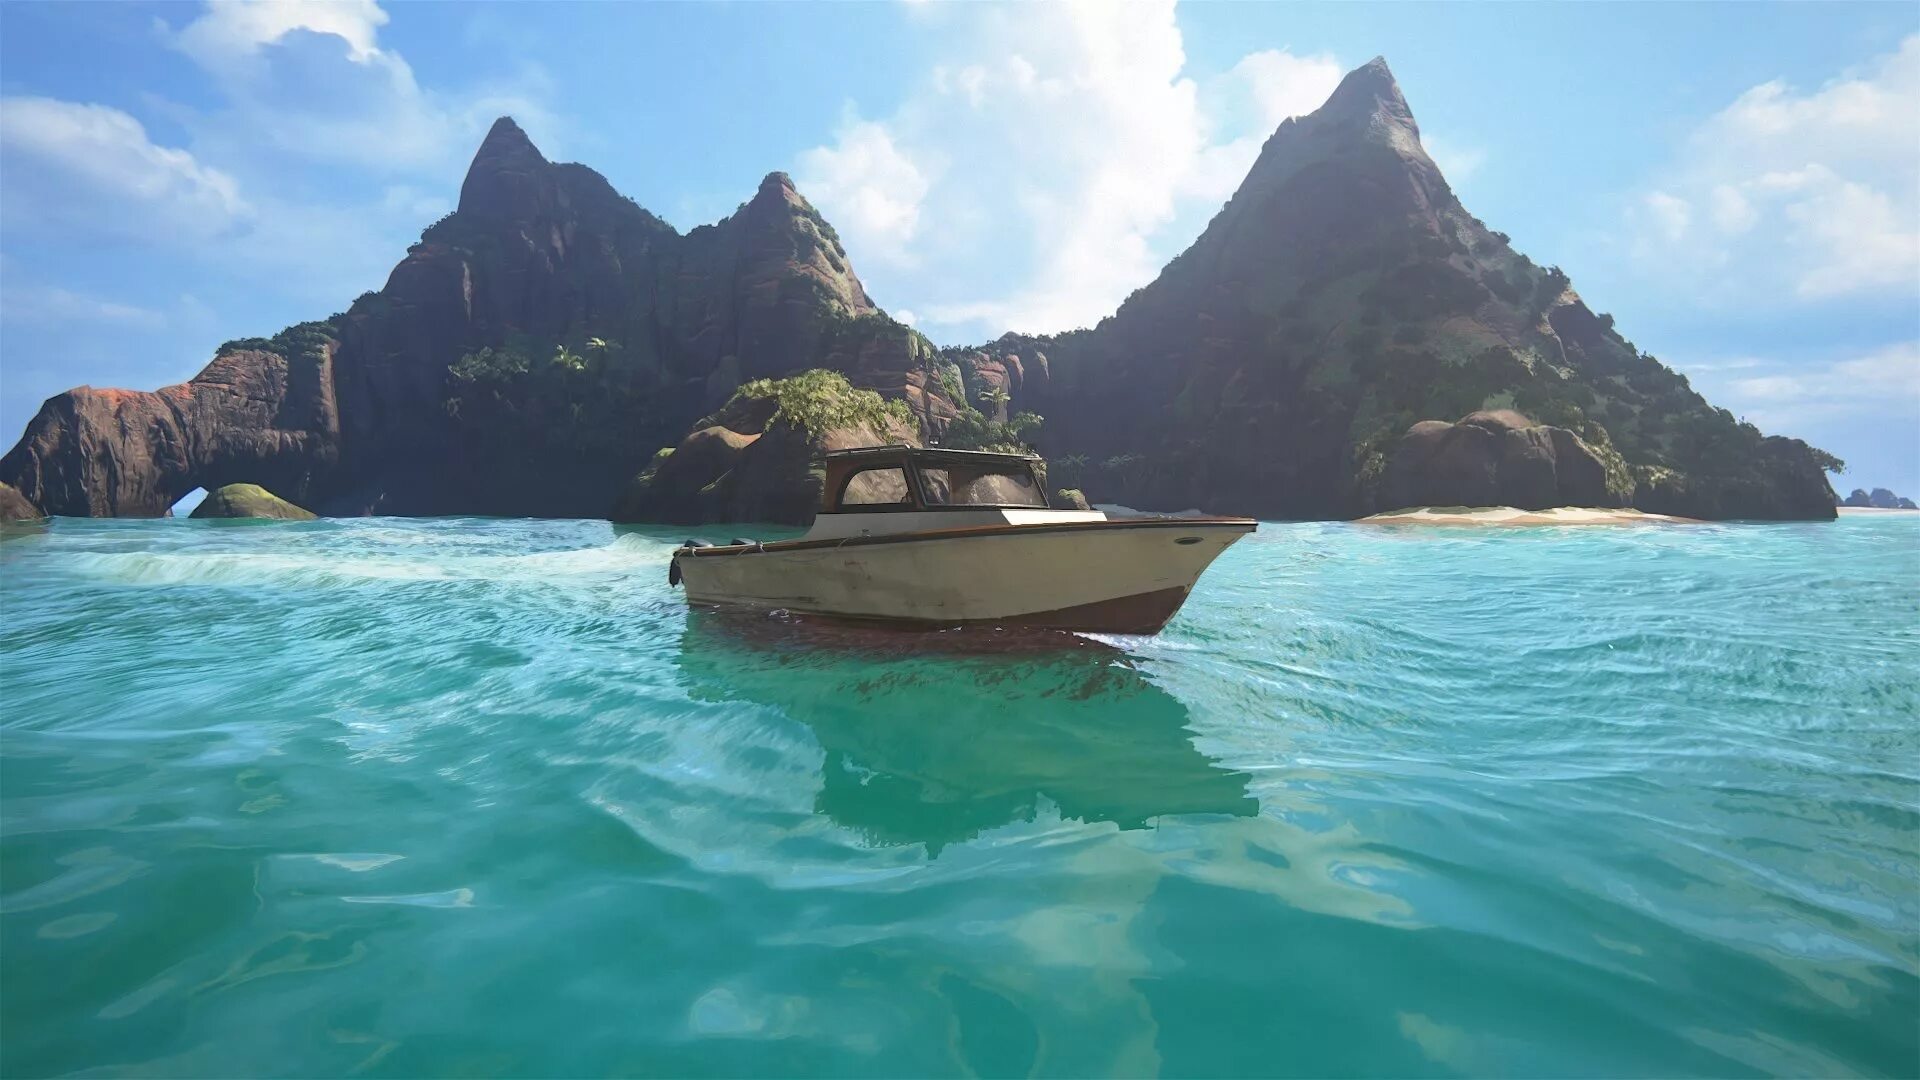 Uncharted 4. Uncharted 4 красота. Uncharted 4 Скриншоты. Uncharted 4 Water.